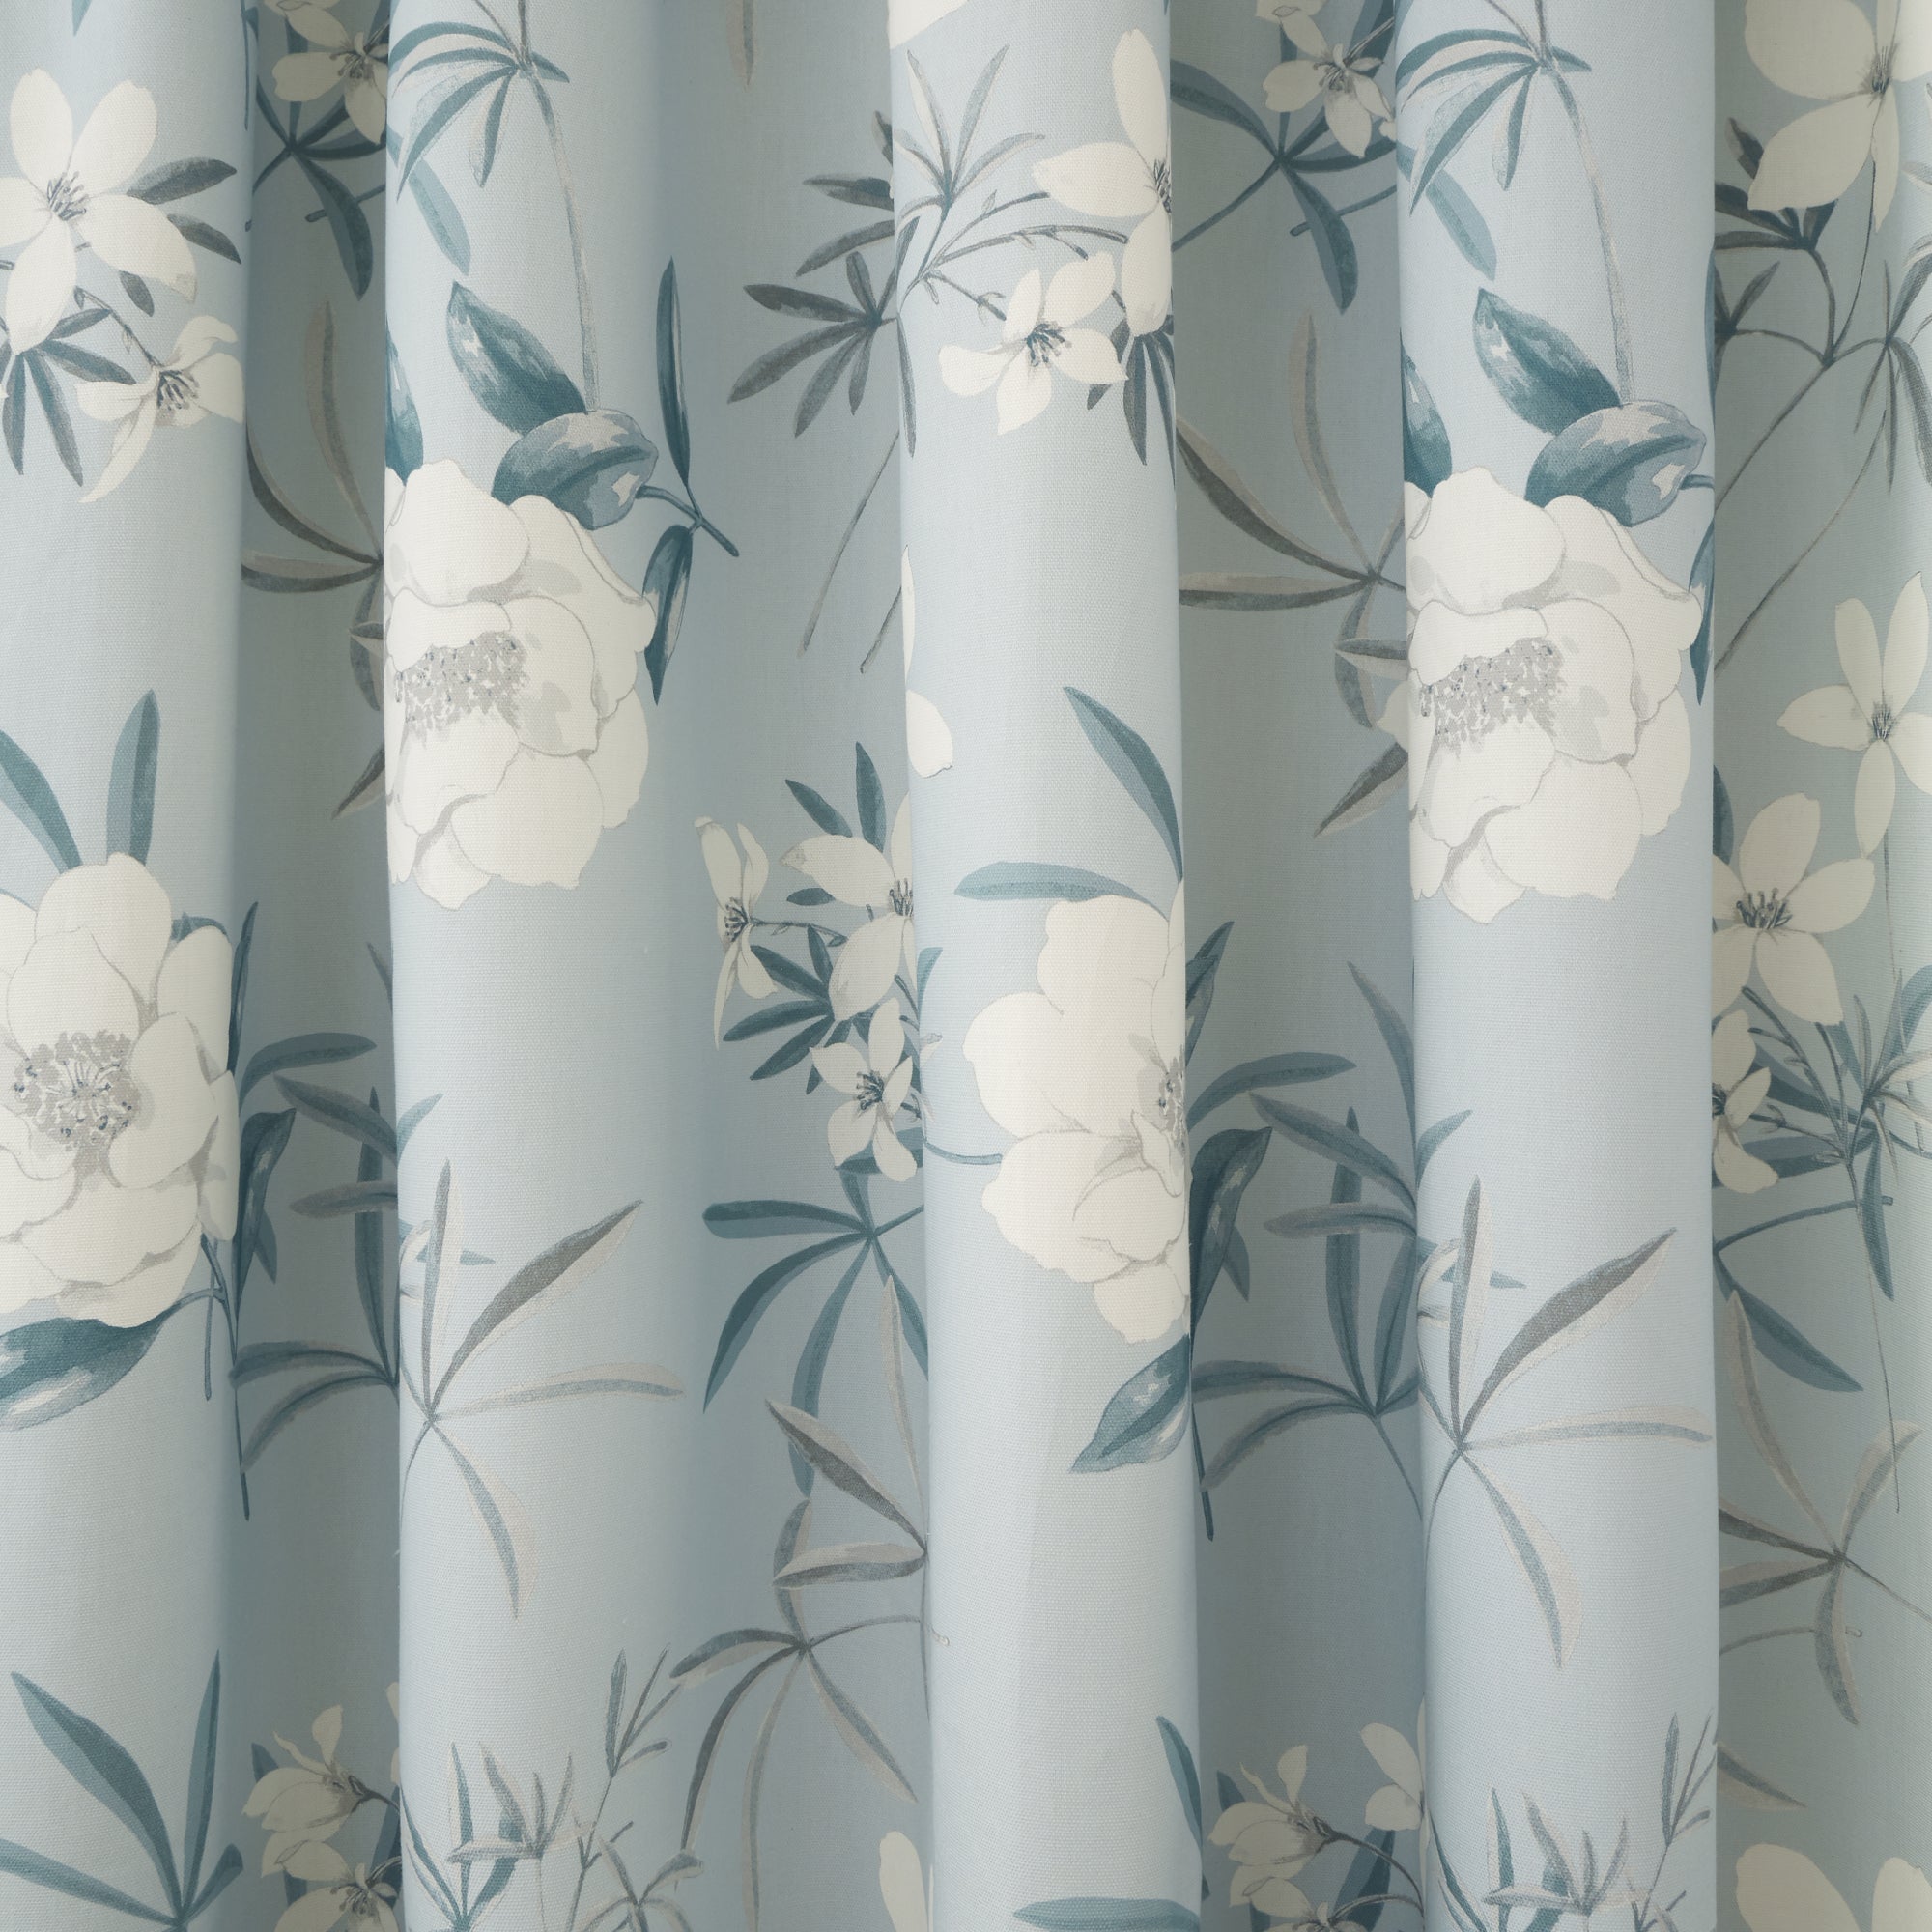 Pair of Pencil Pleat Curtains With Tie-Backs Eve by Dreams & Drapes Design in Duck Egg